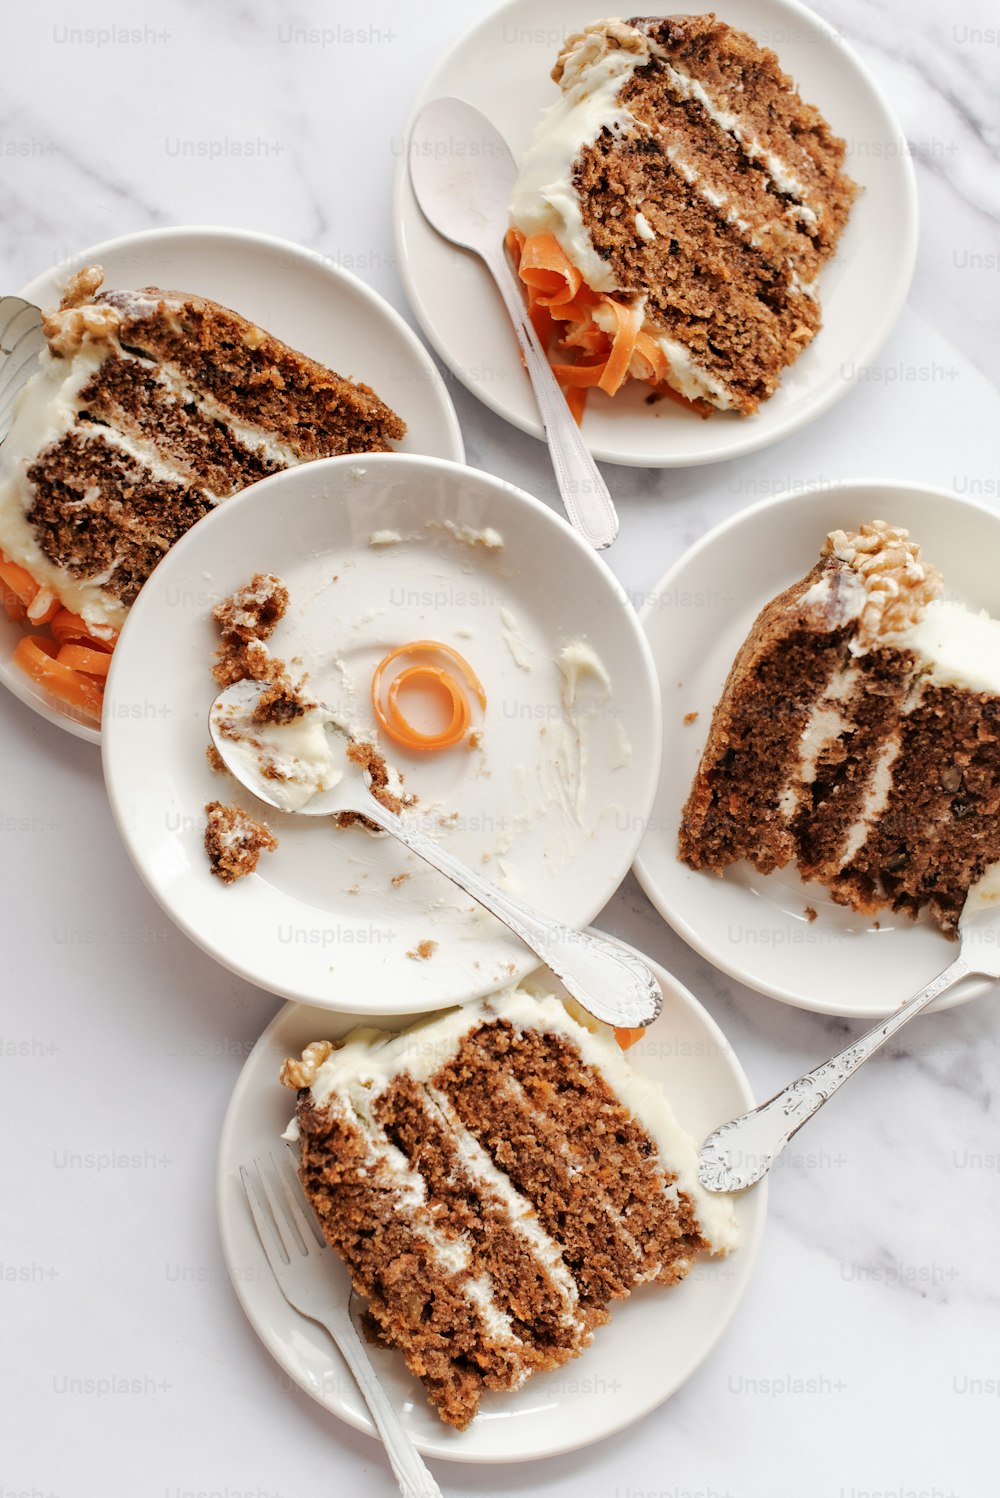 four plates of carrot cake with cream cheese frosting